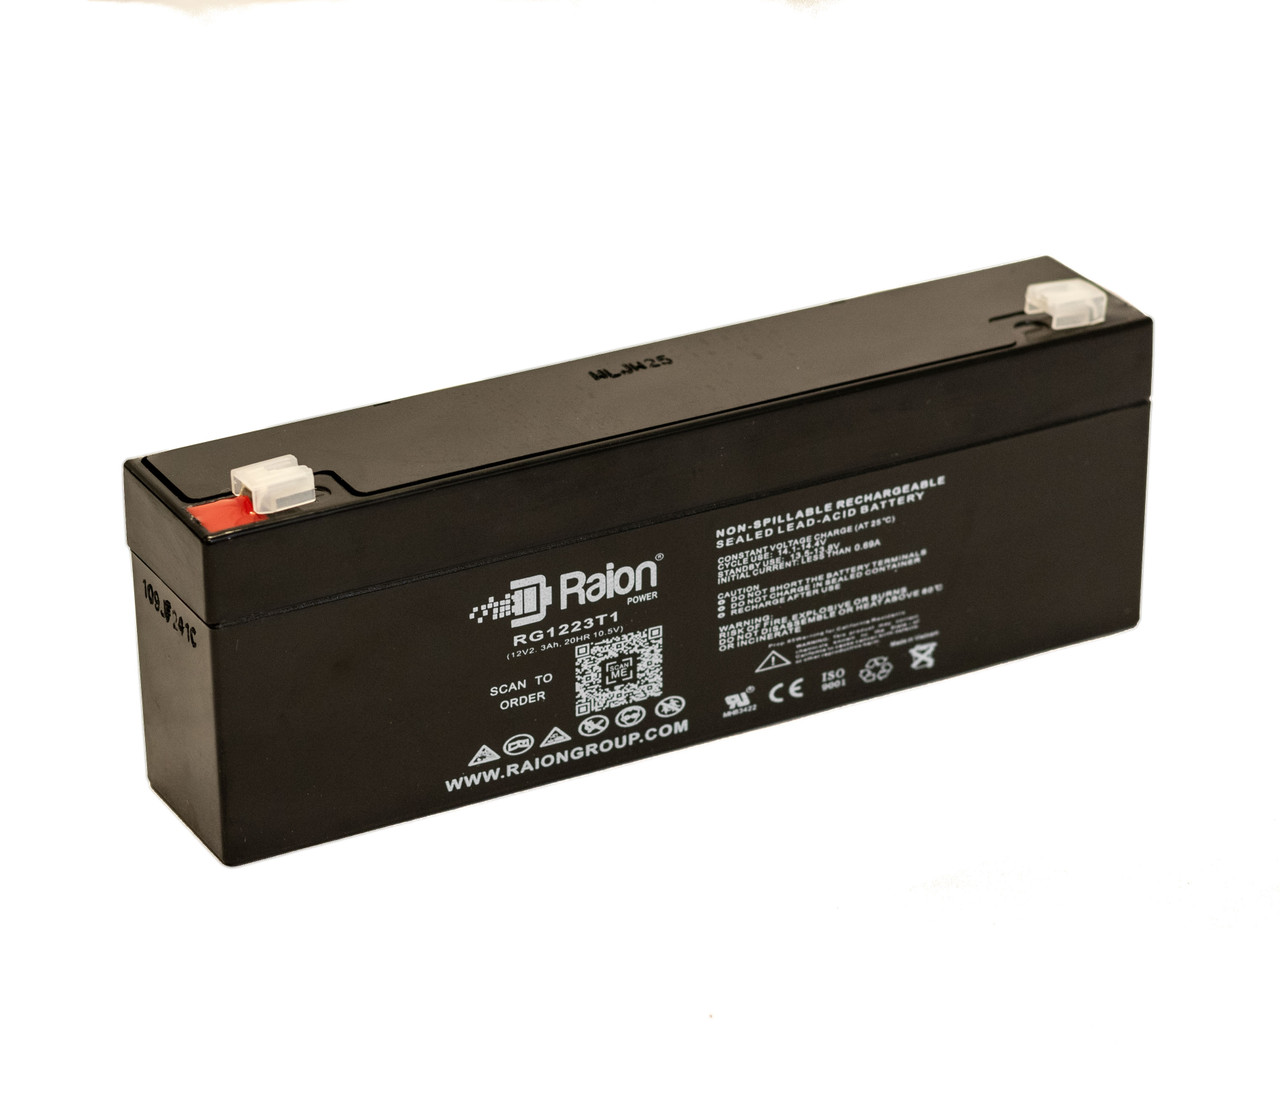 Raion Power RG1223T1 Replacement Battery for Newark 84F1012